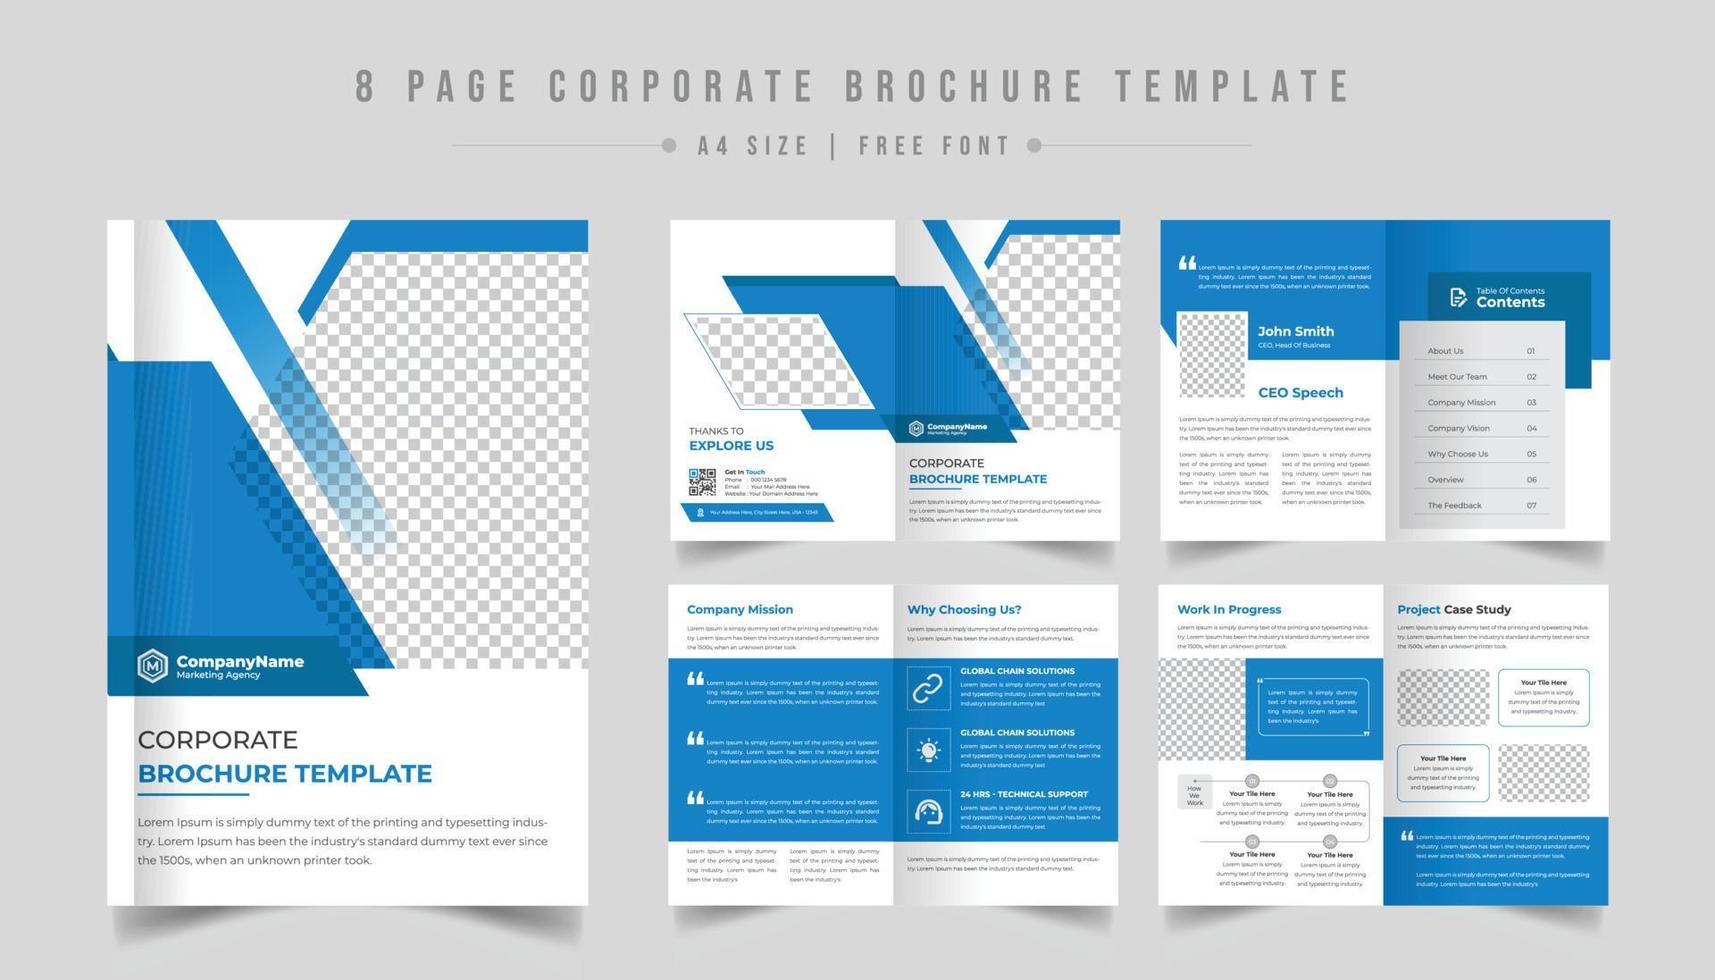 Company brochure template design, 8-page corporate brochure layout, minimal business brochure template design, Proposal project, booklet, company profile, Project proposal, corporate, catalog, annual vector